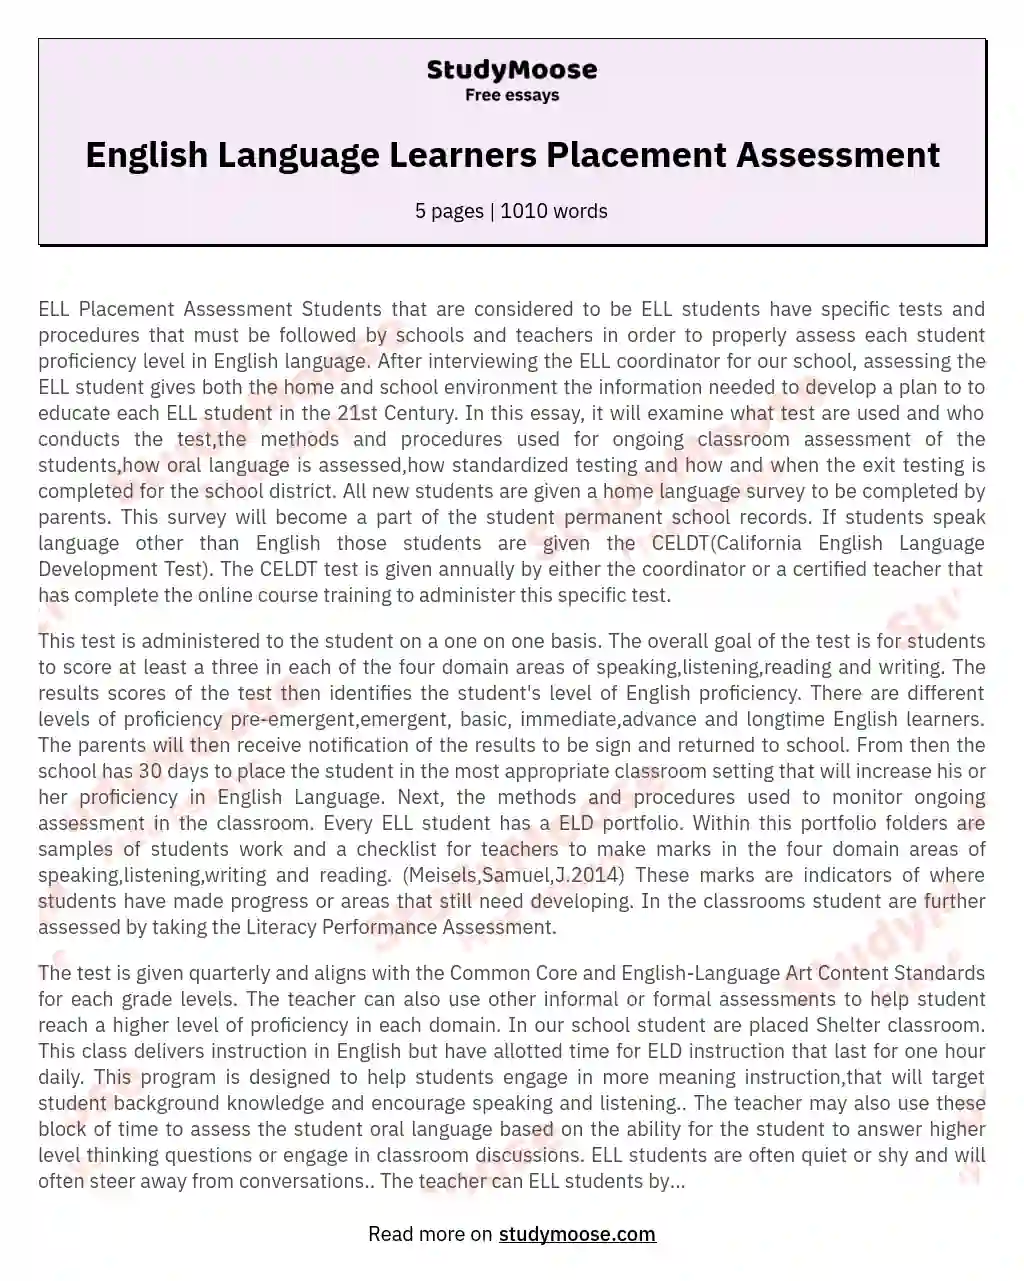 English Language Learners Placement Assessment essay